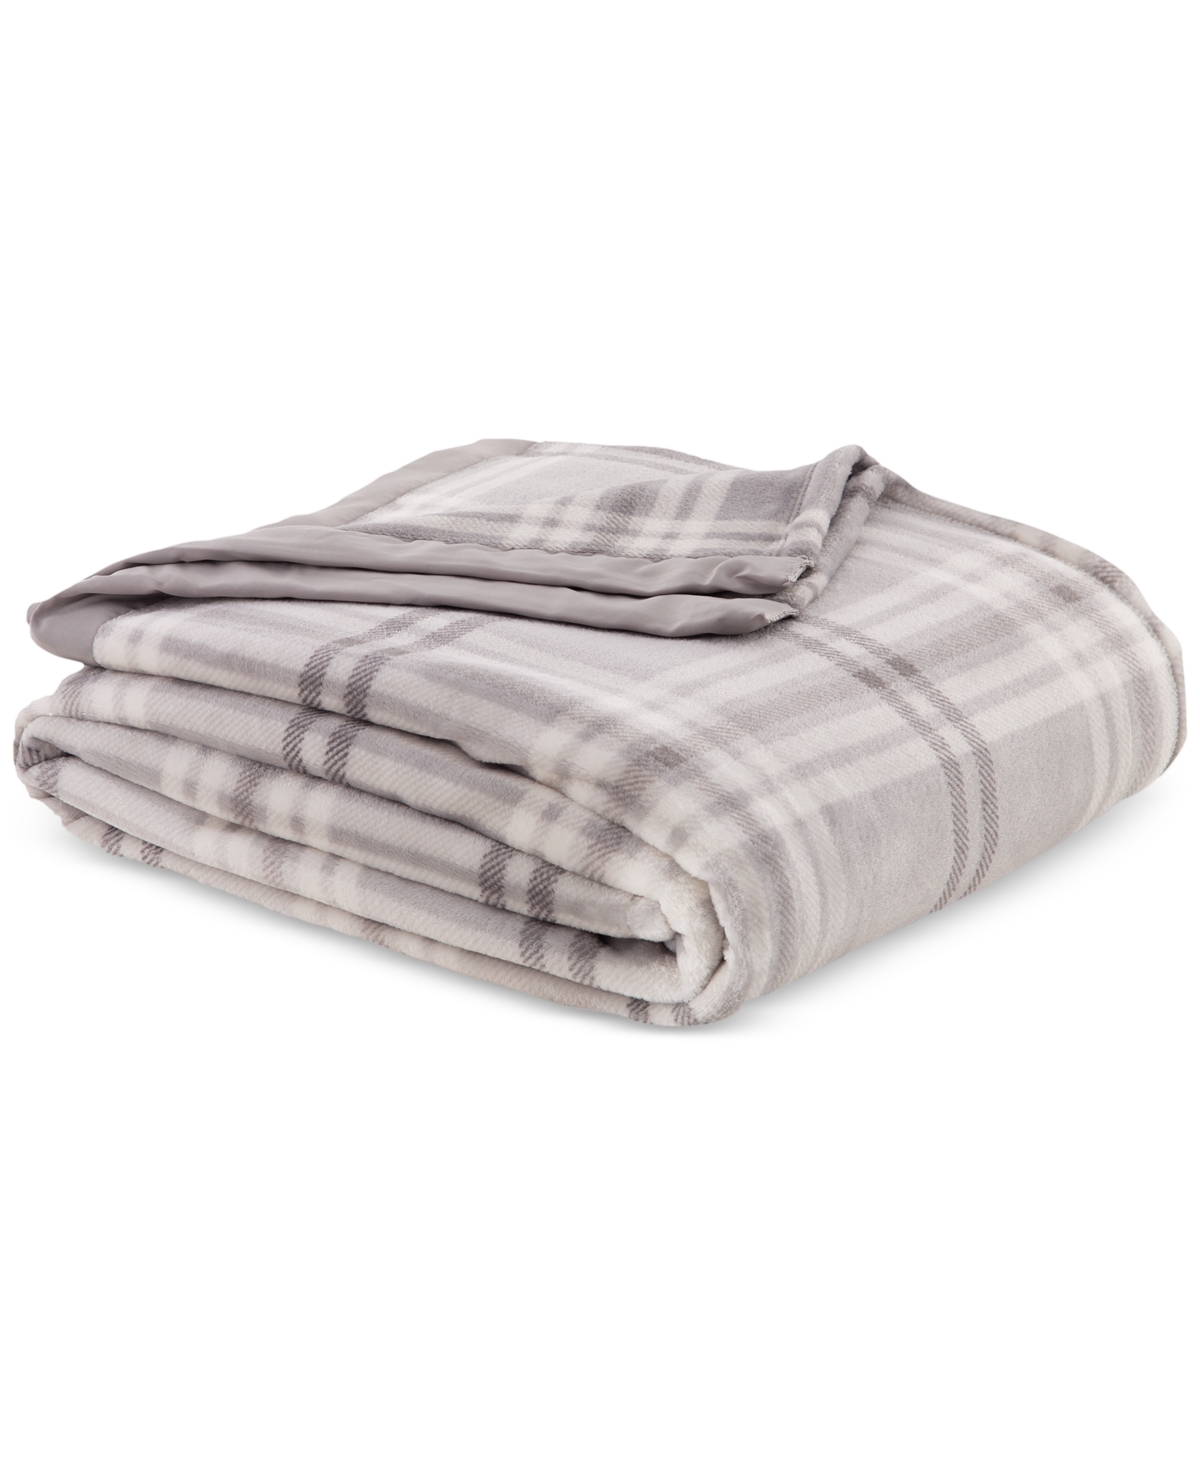 Berkshire Classic Velvety Plush Twin Blanket, Created For Macy's In Grey Plaid